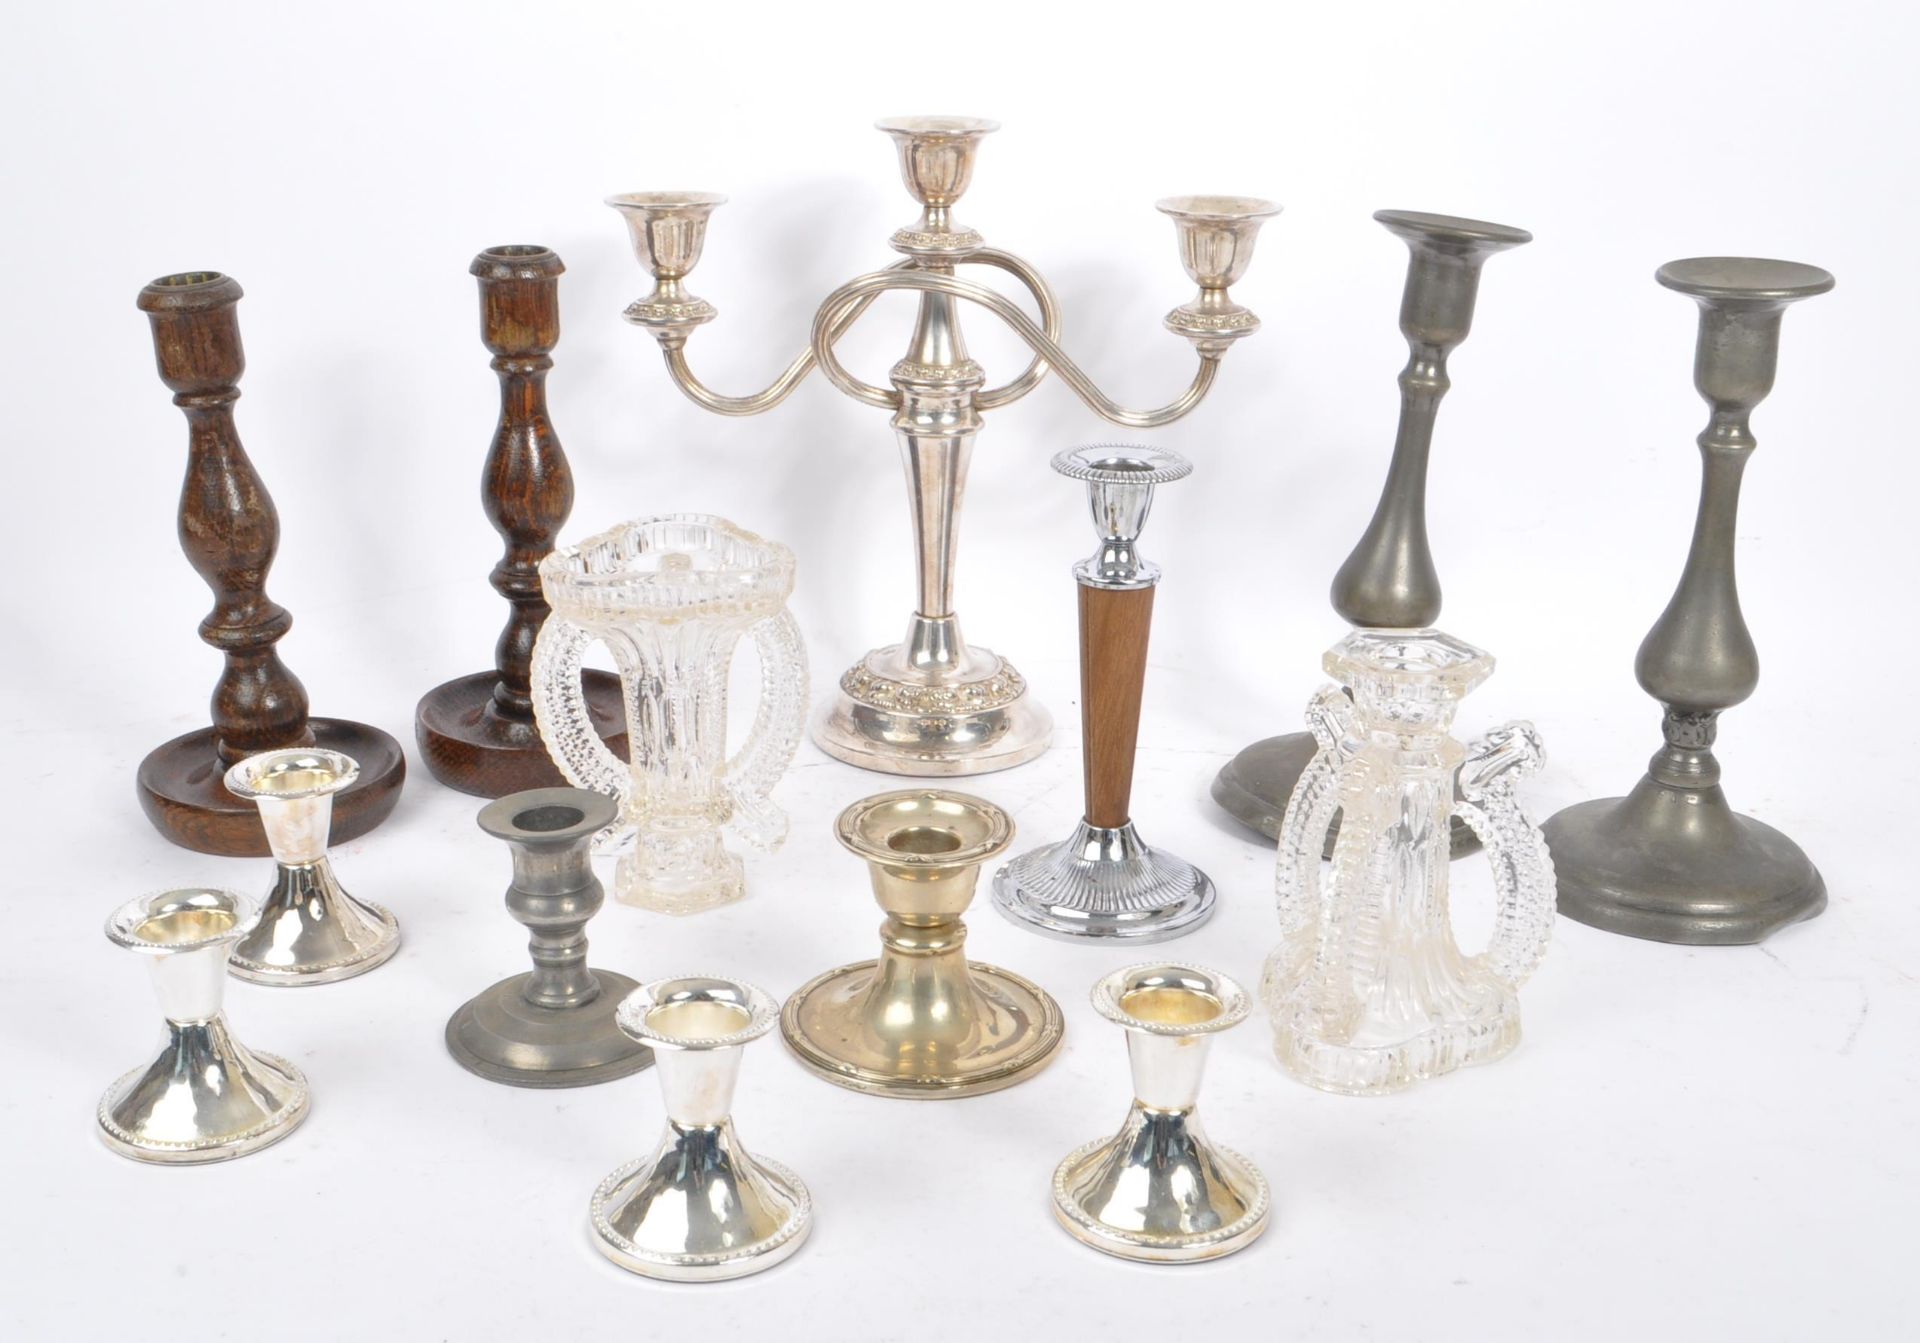 COLLECTION OF 20TH CENTURY CANDLESTICKS